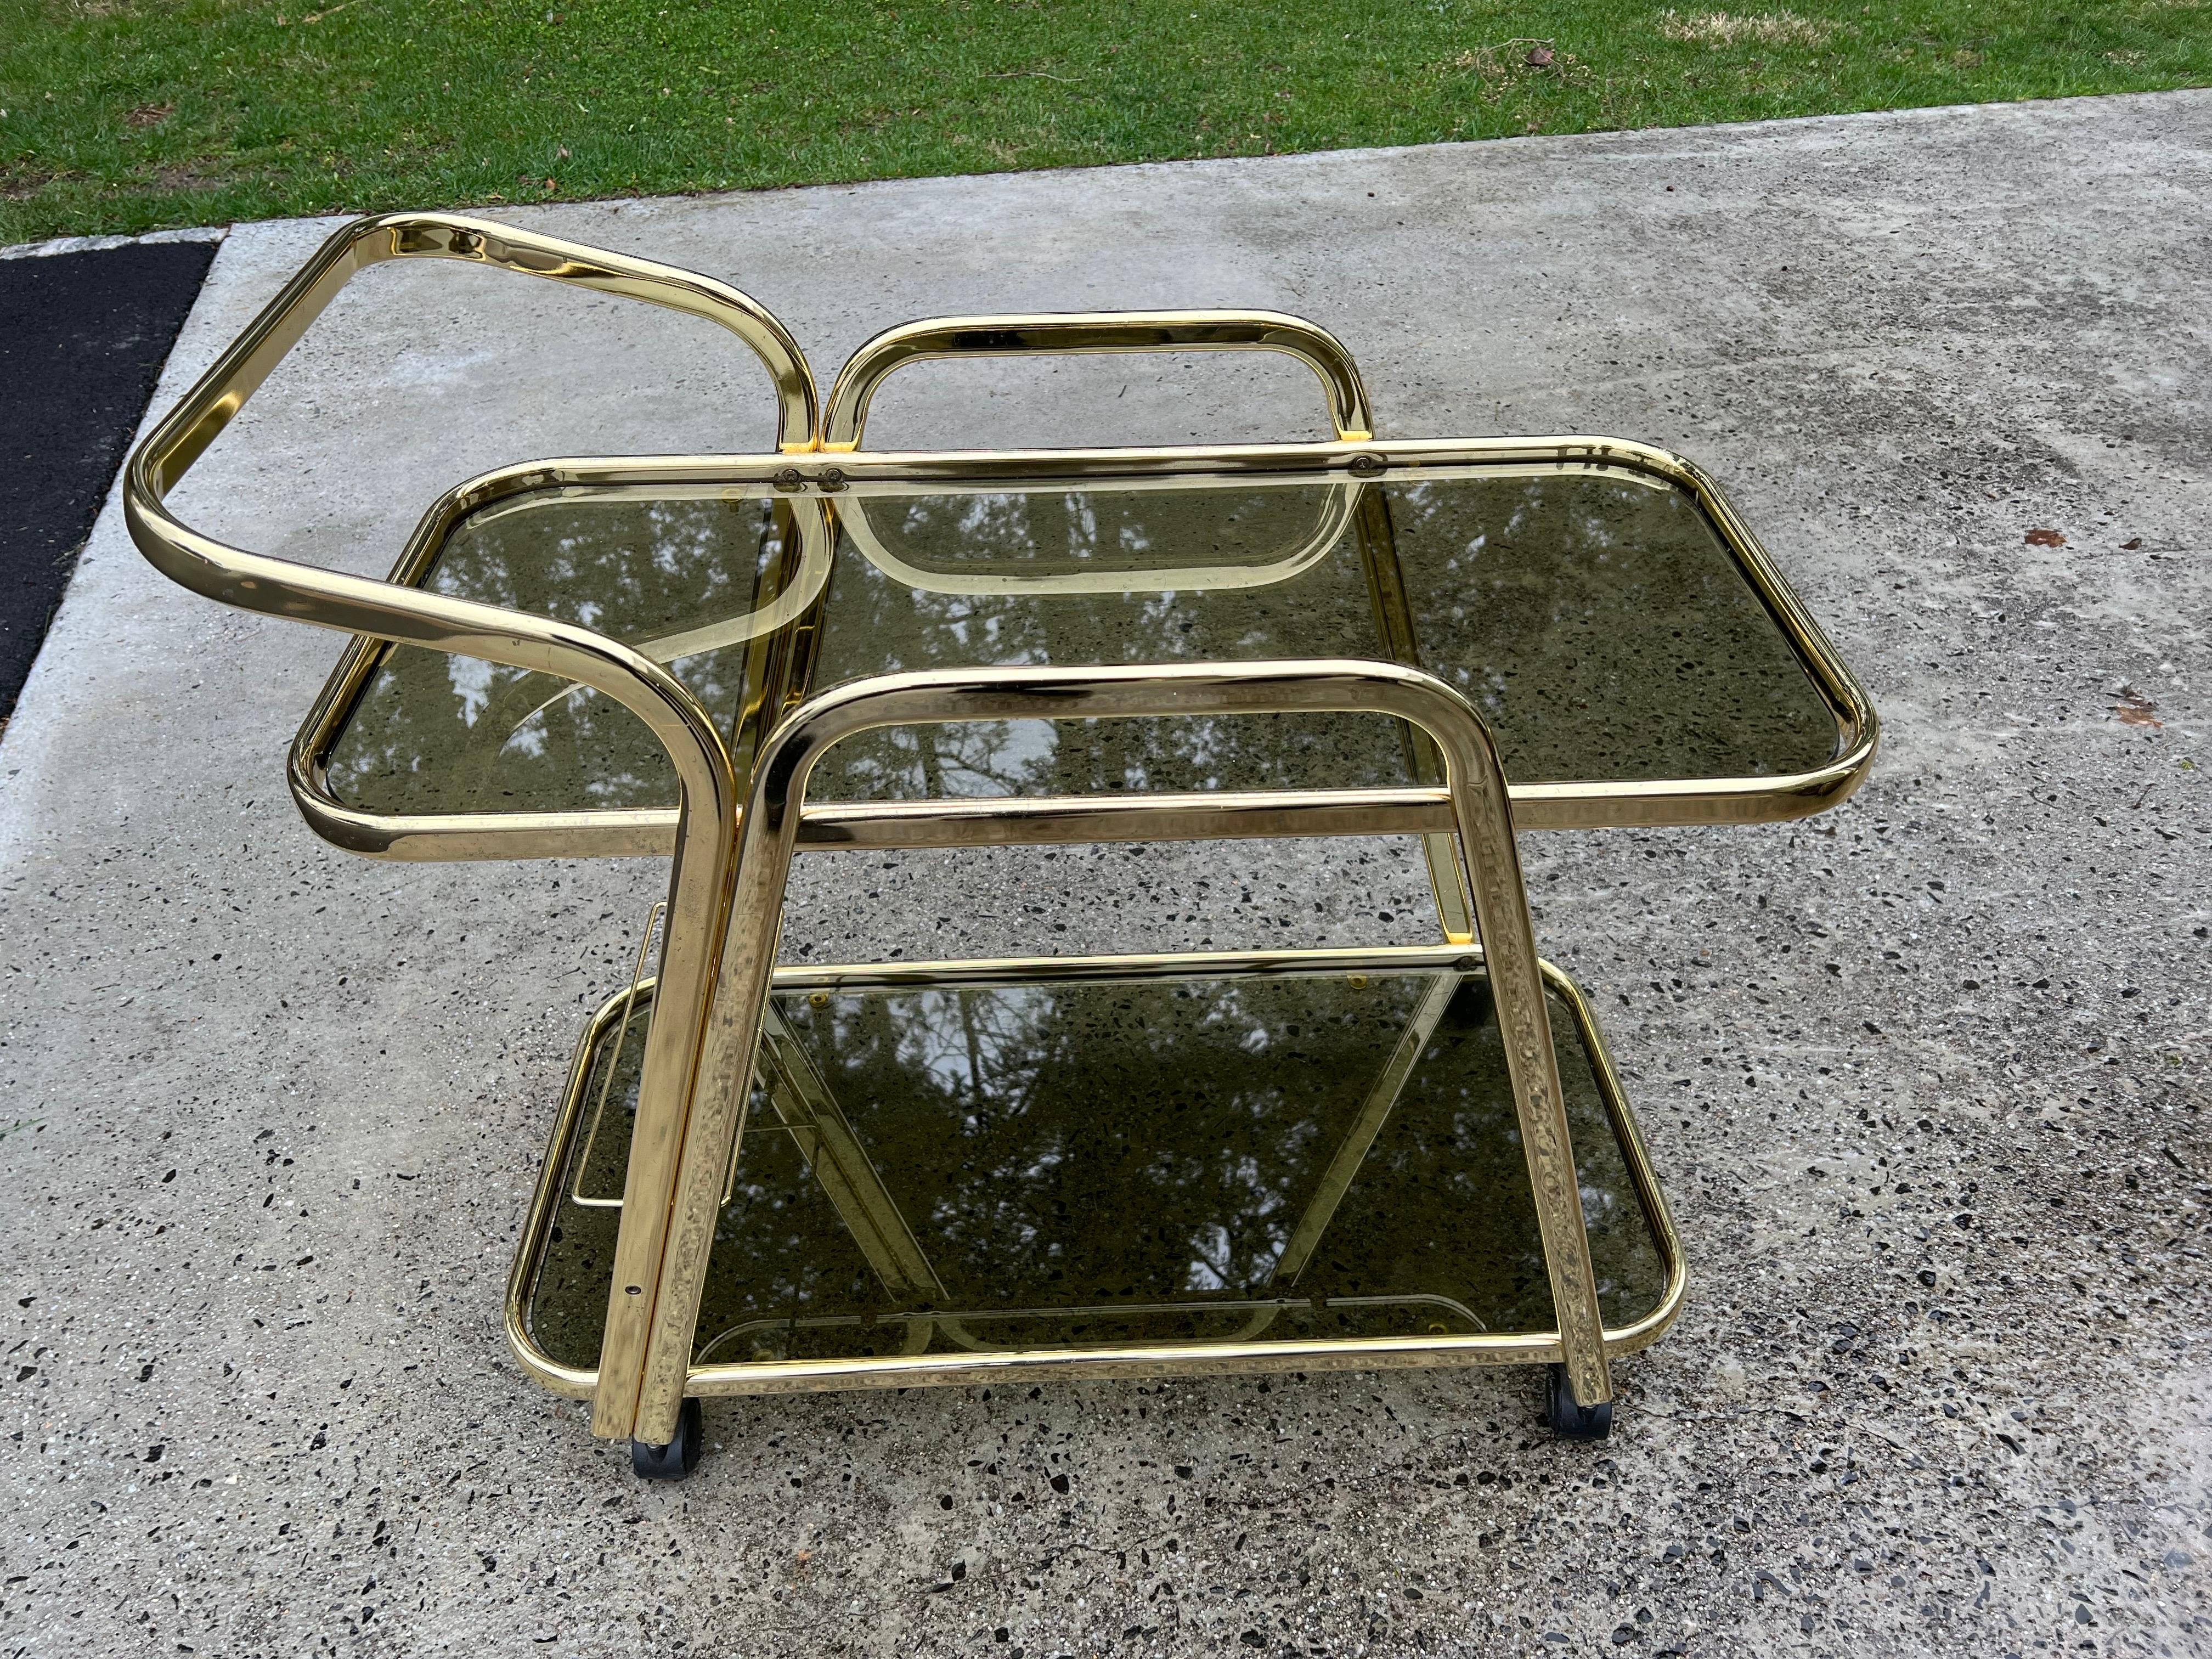 Mid-Century brass and smoked glass bar table/cart on wheels. Sleek and sexy Italian styling most likely attributed to Morex. This size cart is bigger than most bar carts and very sturdy.
 